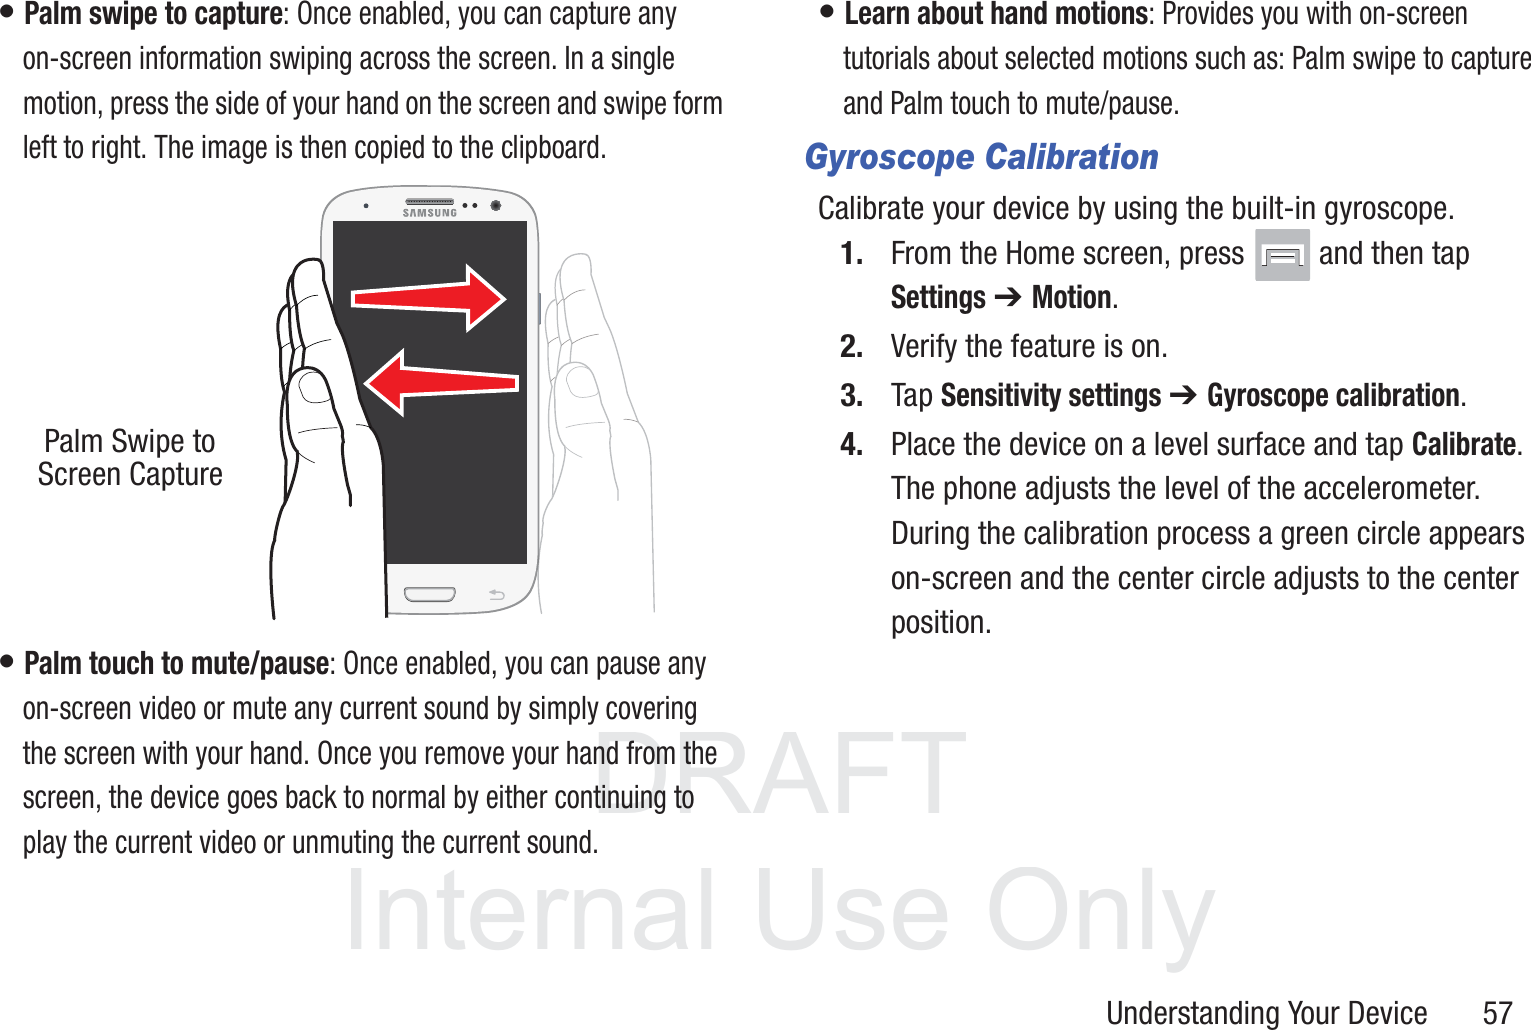 DRAFT InternalUse OnlyUnderstanding Your Device       57• Palm swipe to capture: Once enabled, you can capture any on-screen information swiping across the screen. In a single motion, press the side of your hand on the screen and swipe form left to right. The image is then copied to the clipboard. • Palm touch to mute/pause: Once enabled, you can pause any on-screen video or mute any current sound by simply covering the screen with your hand. Once you remove your hand from the screen, the device goes back to normal by either continuing to play the current video or unmuting the current sound.• Learn about hand motions: Provides you with on-screen tutorials about selected motions such as: Palm swipe to capture and Palm touch to mute/pause.Gyroscope CalibrationCalibrate your device by using the built-in gyroscope.1. From the Home screen, press   and then tap Settings ➔ Motion.2. Verify the feature is on.3. Tap Sensitivity settings ➔ Gyroscope calibration. 4. Place the device on a level surface and tap Calibrate. The phone adjusts the level of the accelerometer. During the calibration process a green circle appears on-screen and the center circle adjusts to the center position.Palm Swipe to Screen Capture